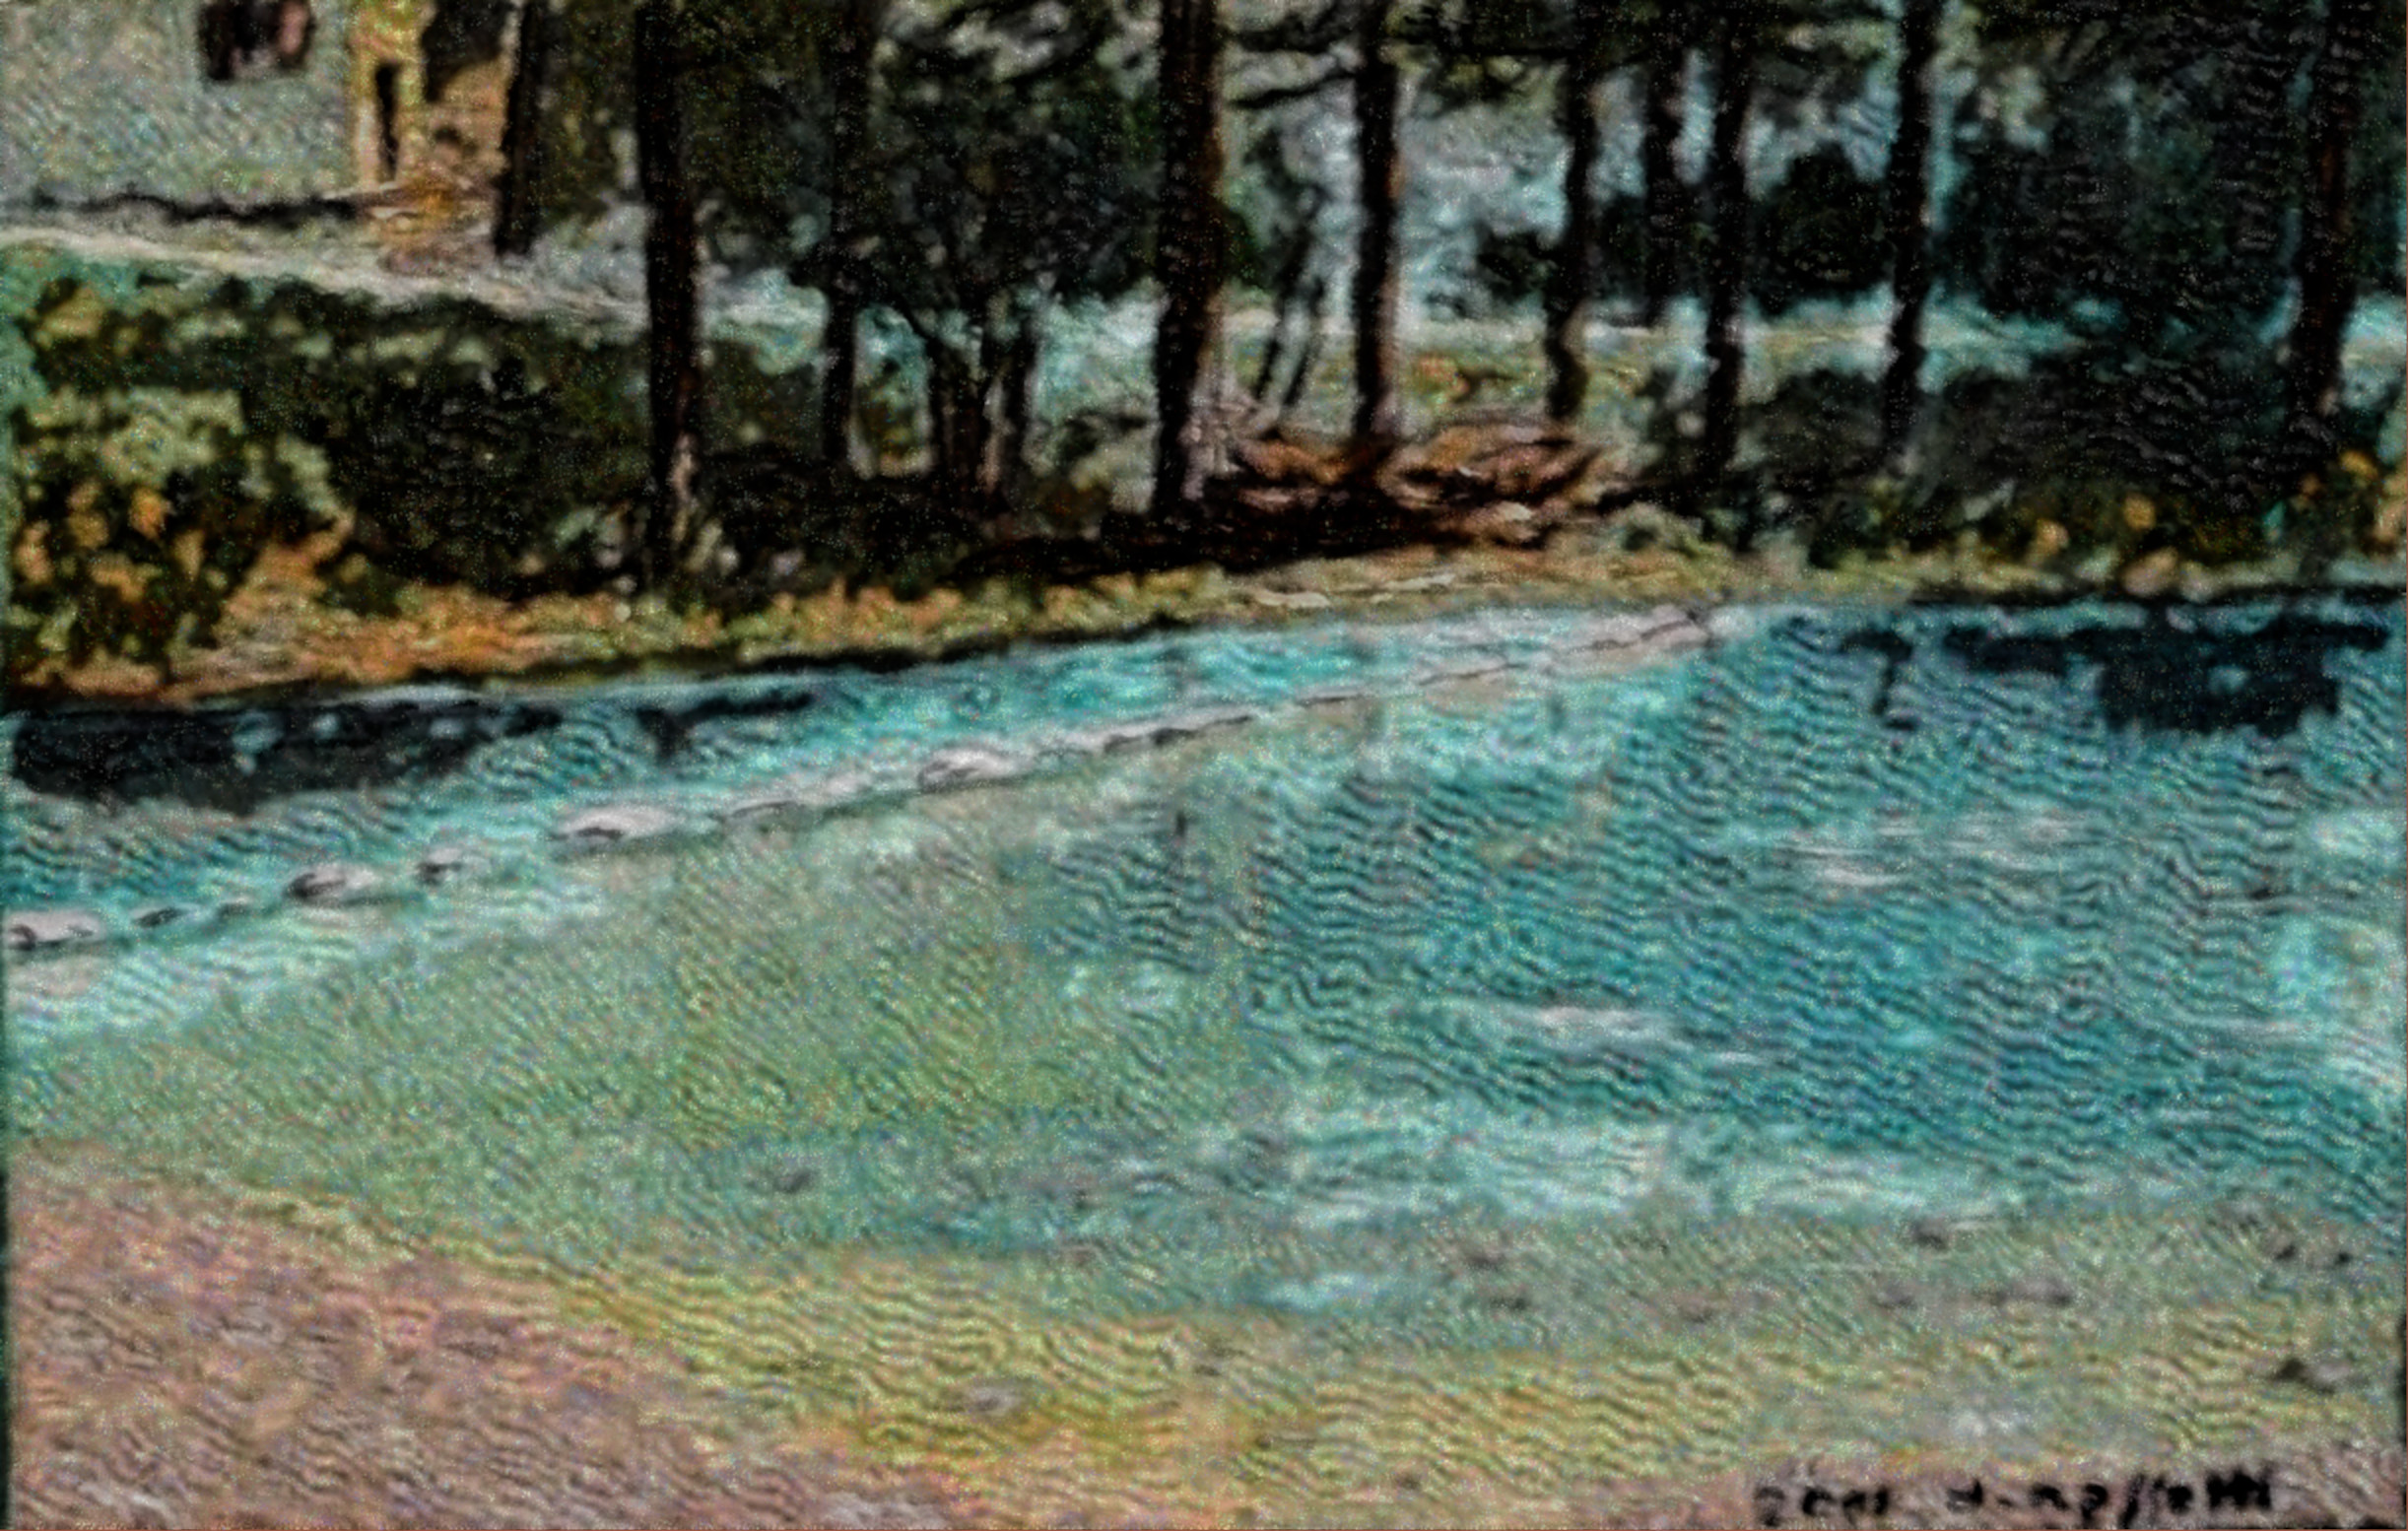 2020-12-16 06-46-25 lago-di-dobbiaco, stroked  using 9 colours giving 75.0% influence to the edges.jpeg